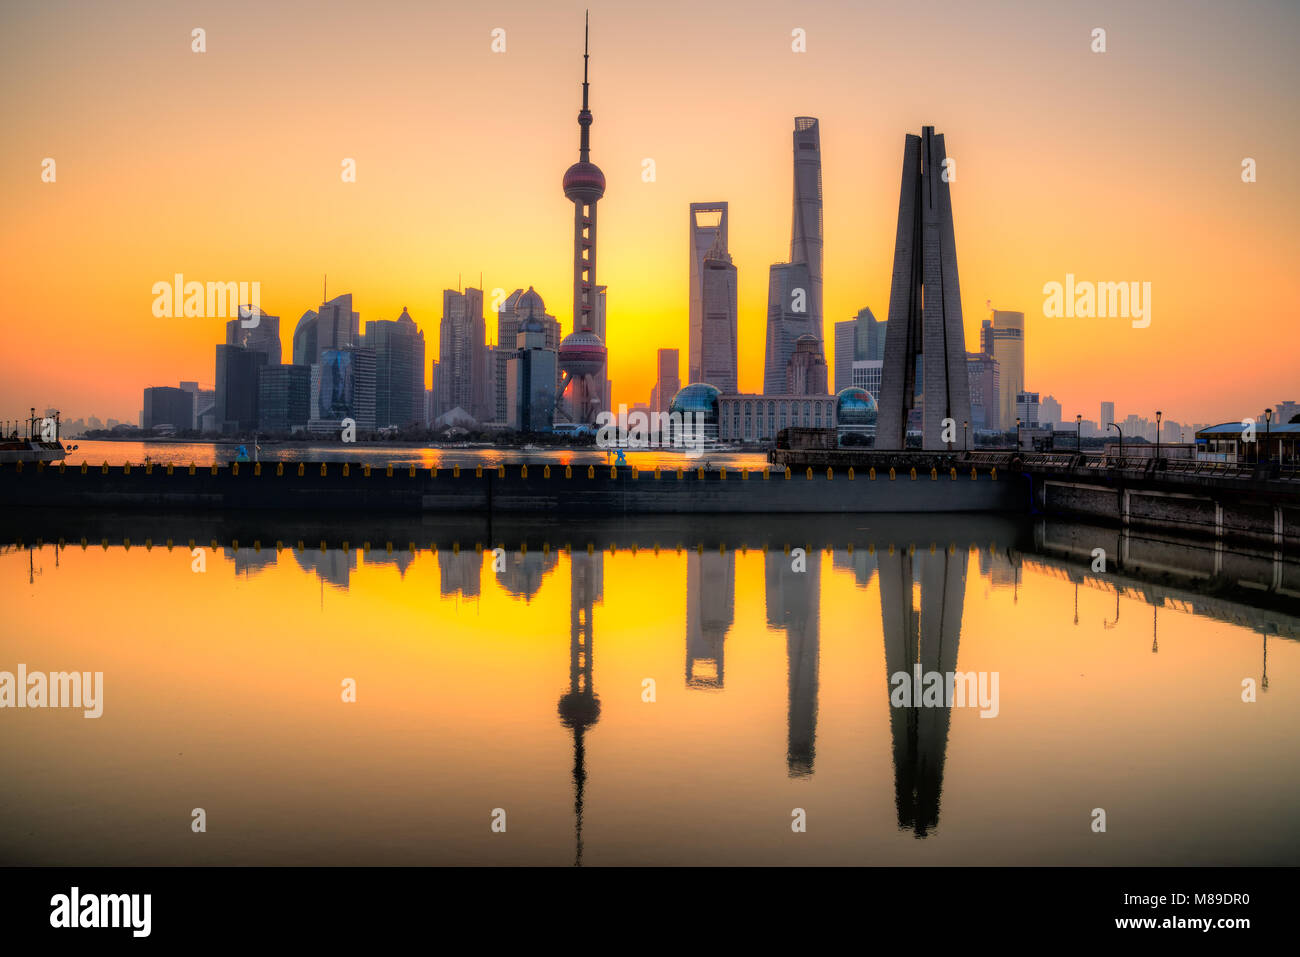 Shanghai city skyline, view of the skyscrapers of Pudong and huangpu River. Shanghai, China. Stock Photo